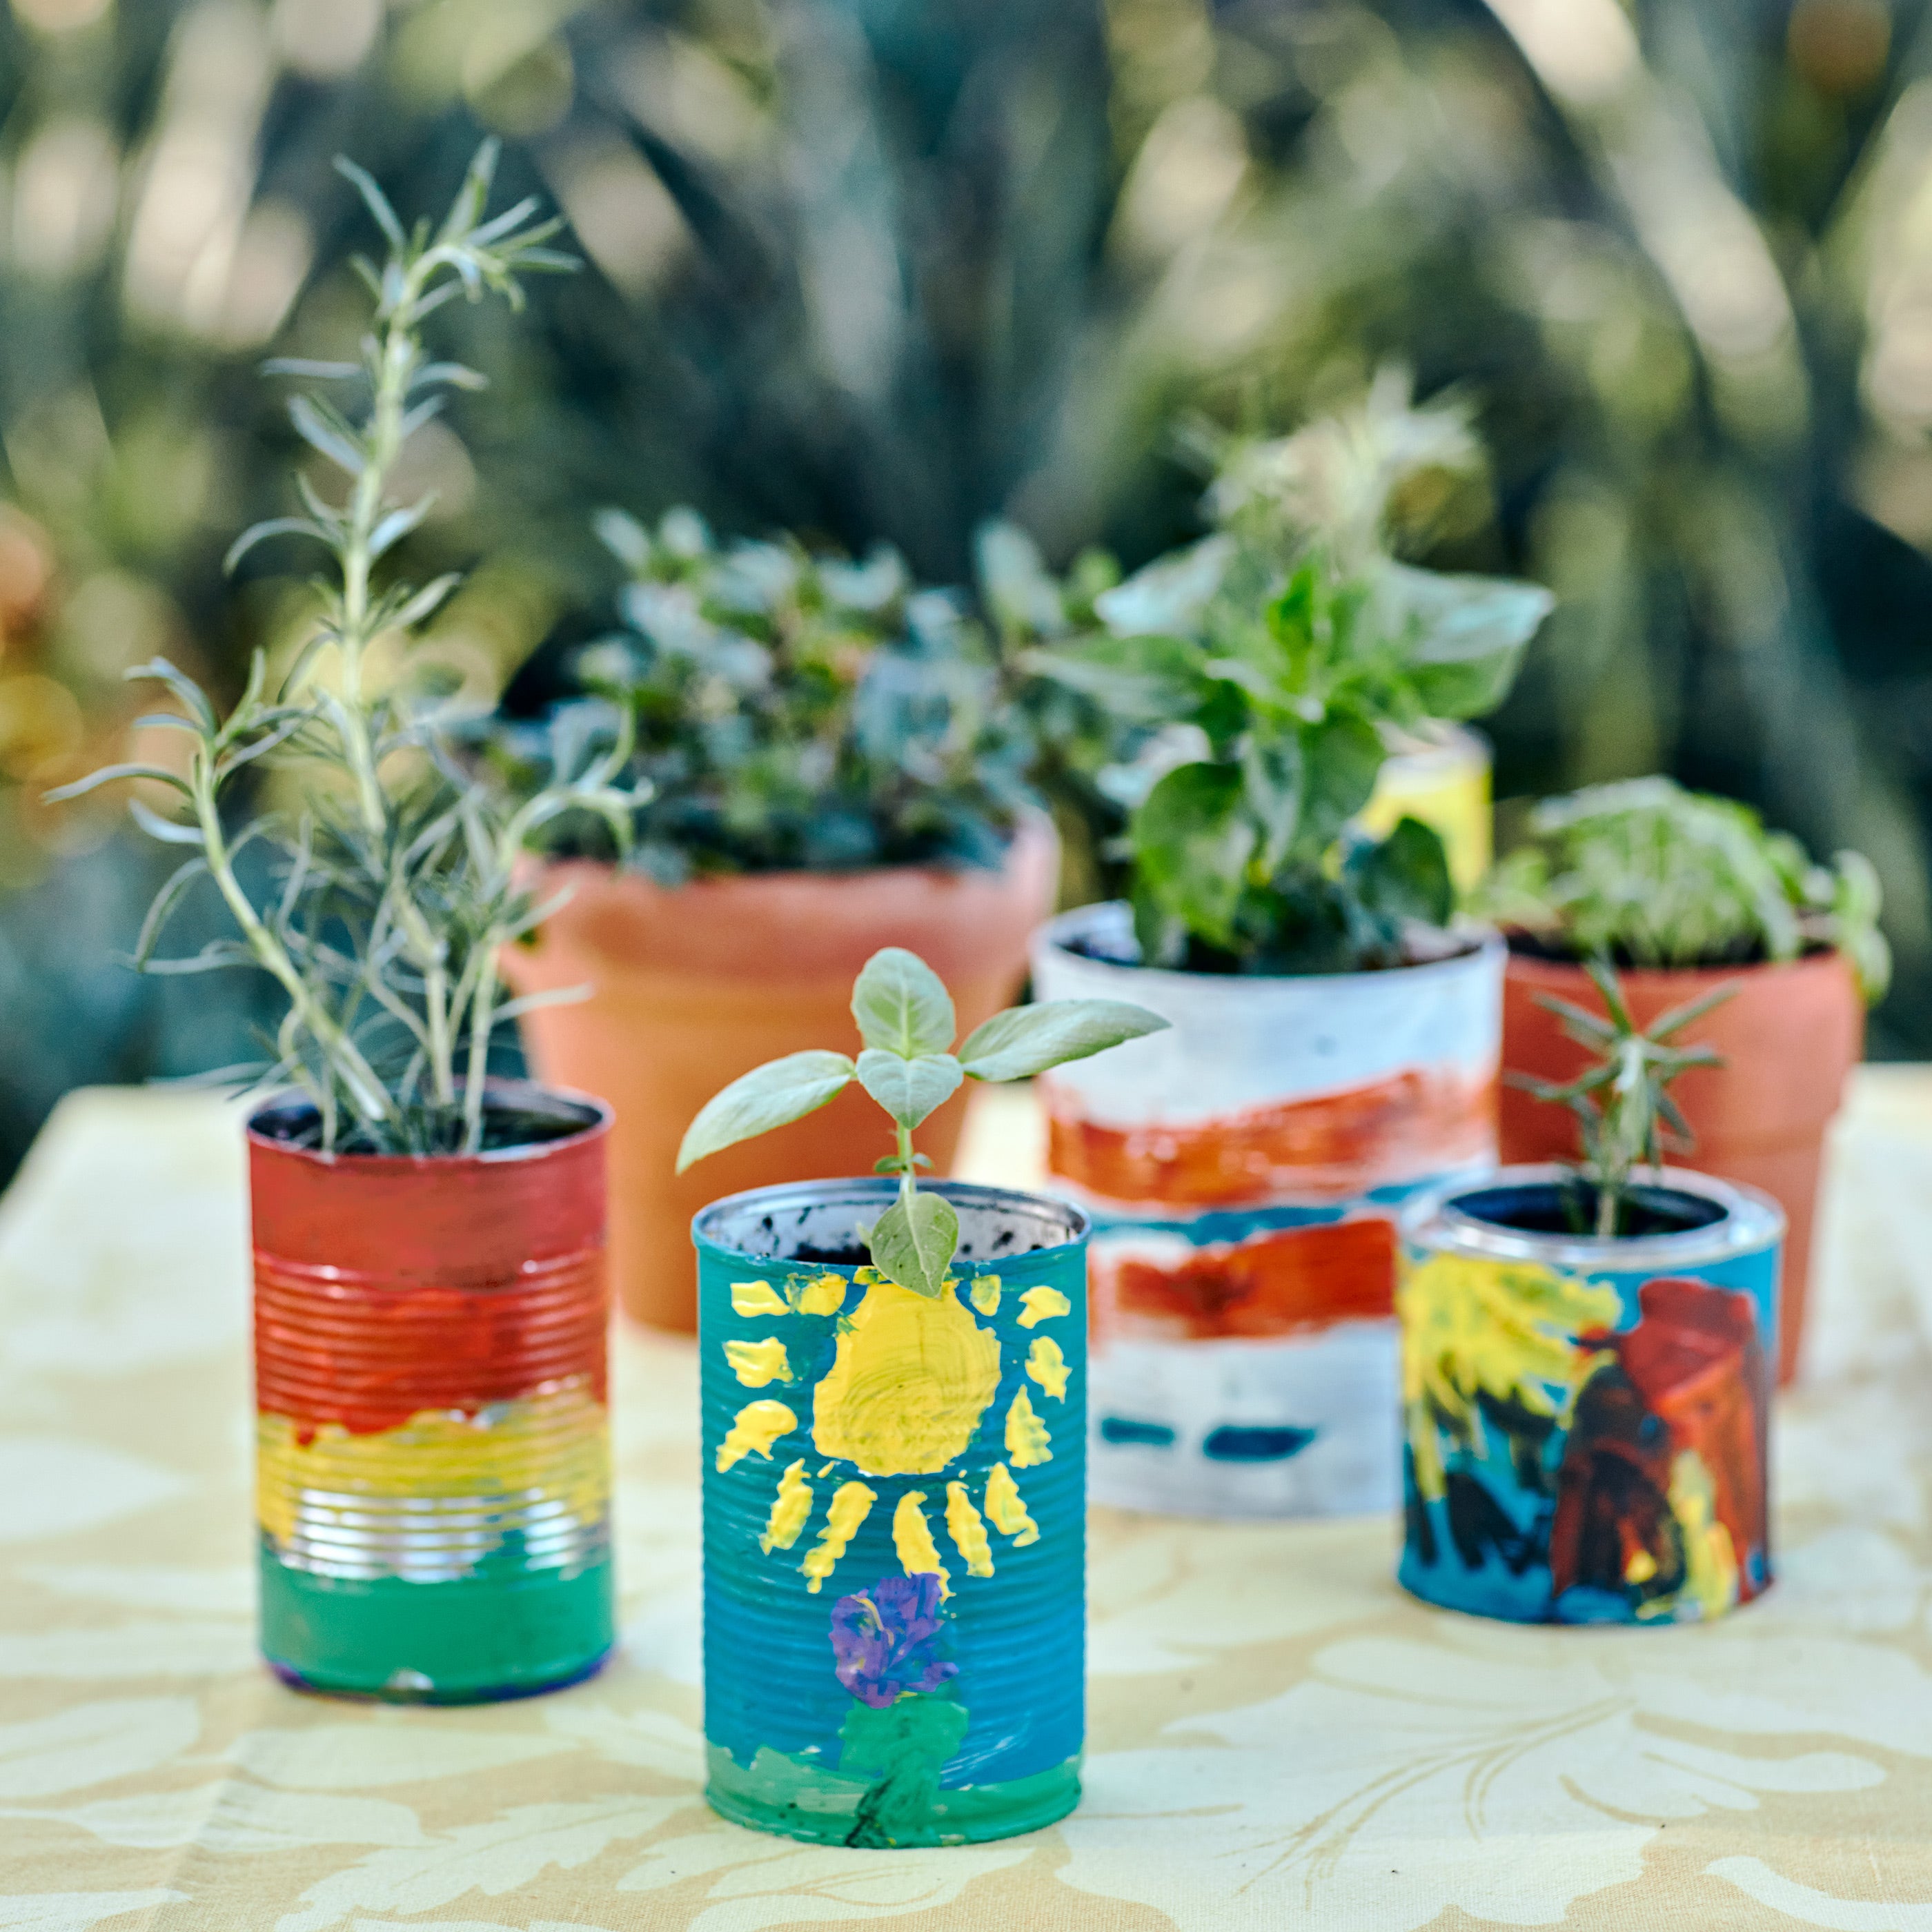 Kid Craft: Upcycled Herb Gardens You Can Make in an Afternoon